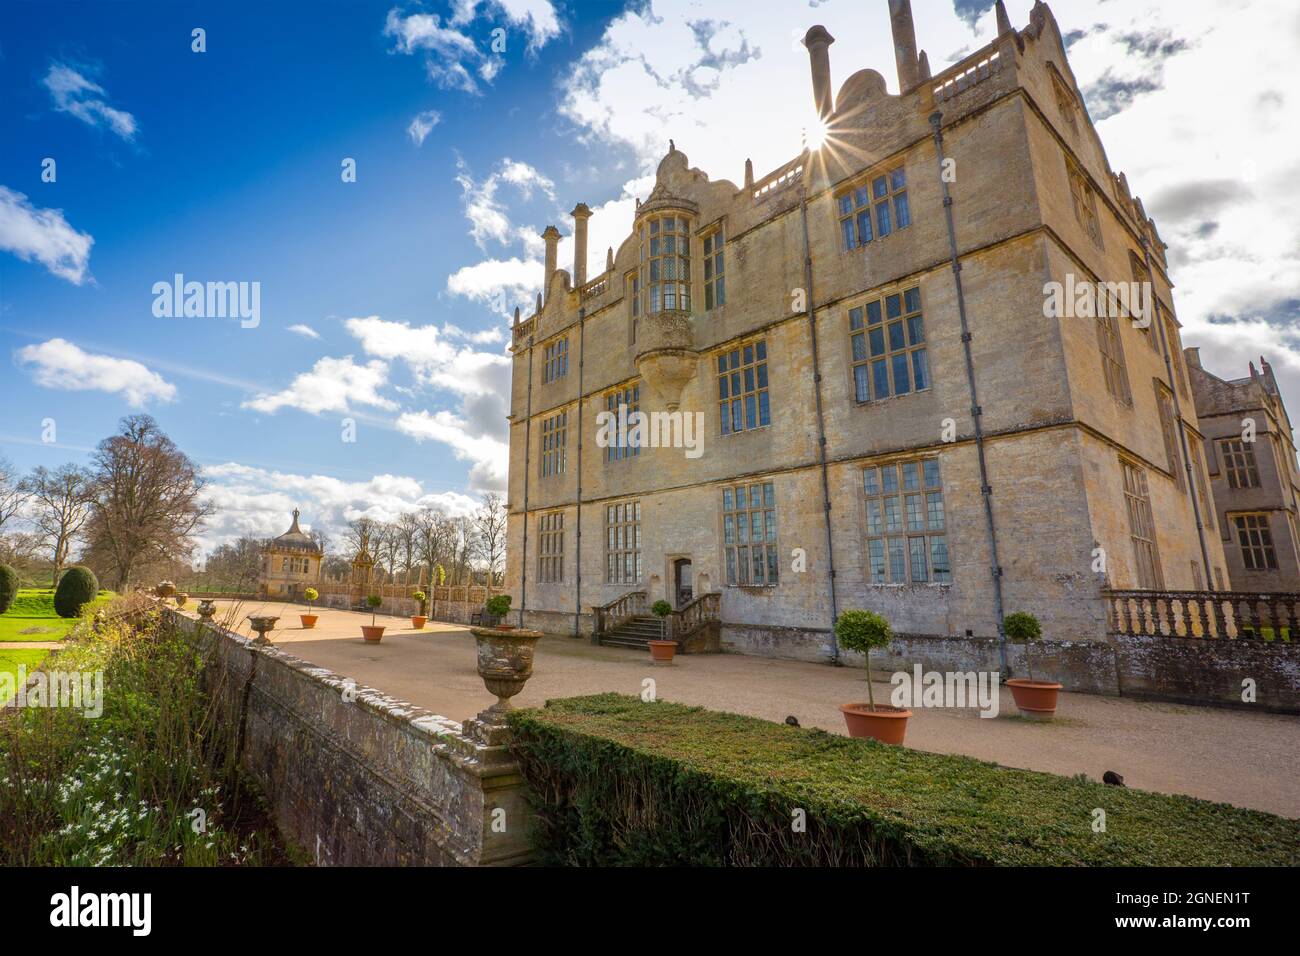 The magnificent architecture of Montacute House in spring sunshine, nr Yeovil, Somerset, England, UK Stock Photo